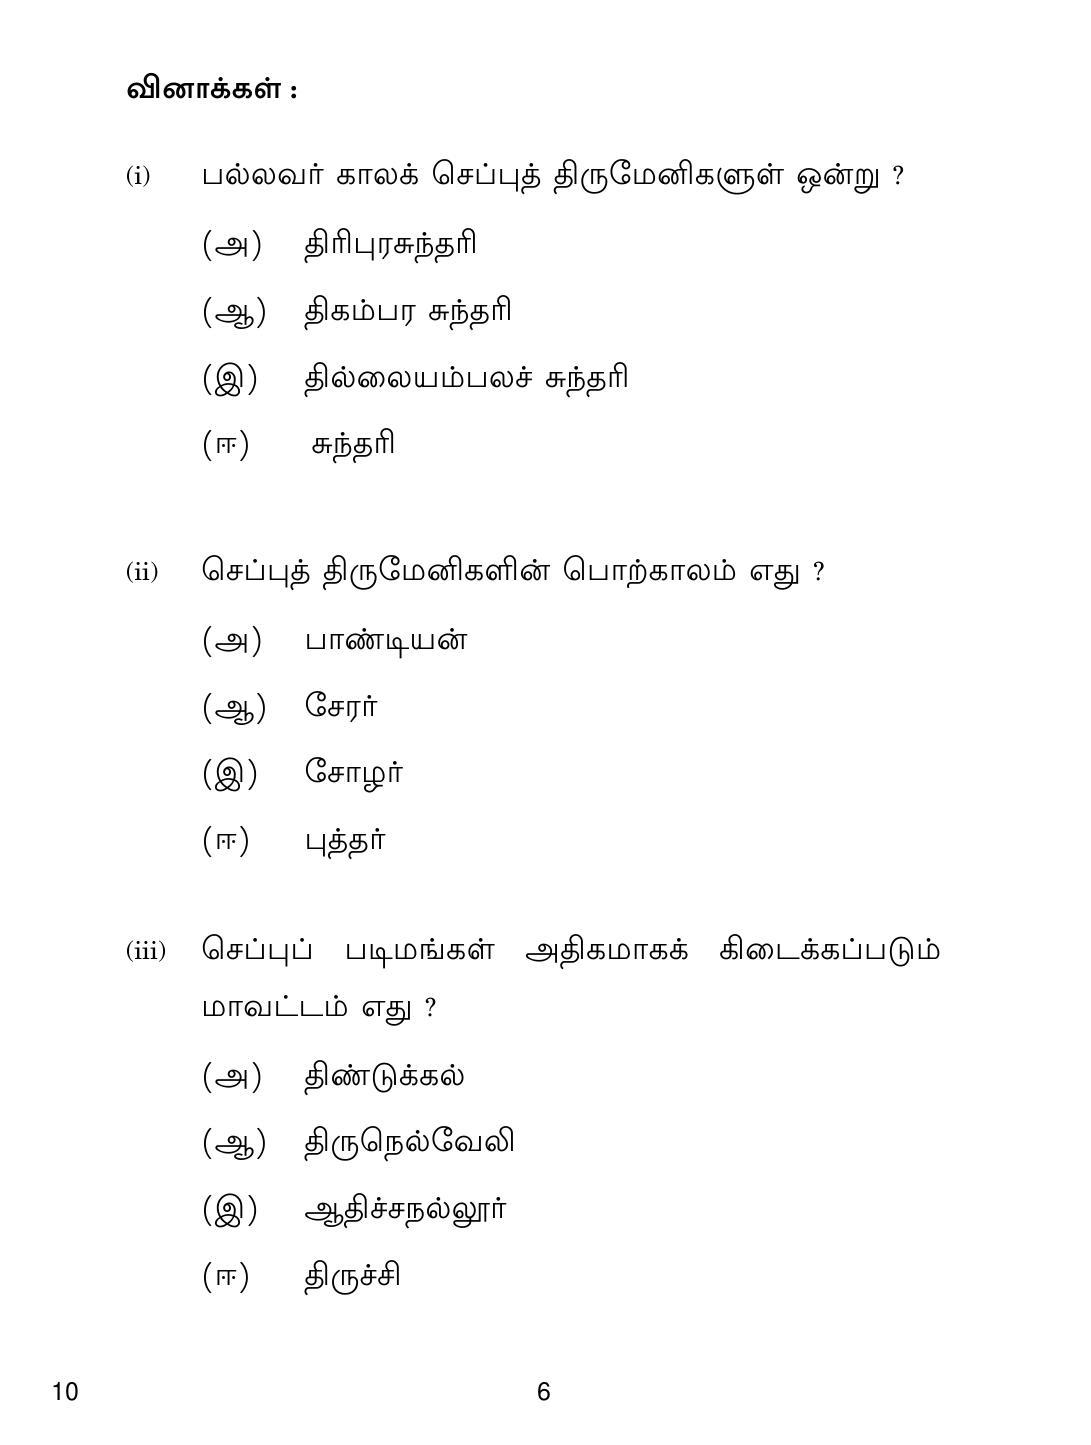 CBSE Class 10 10 Tamil 2019 Question Paper - Page 6